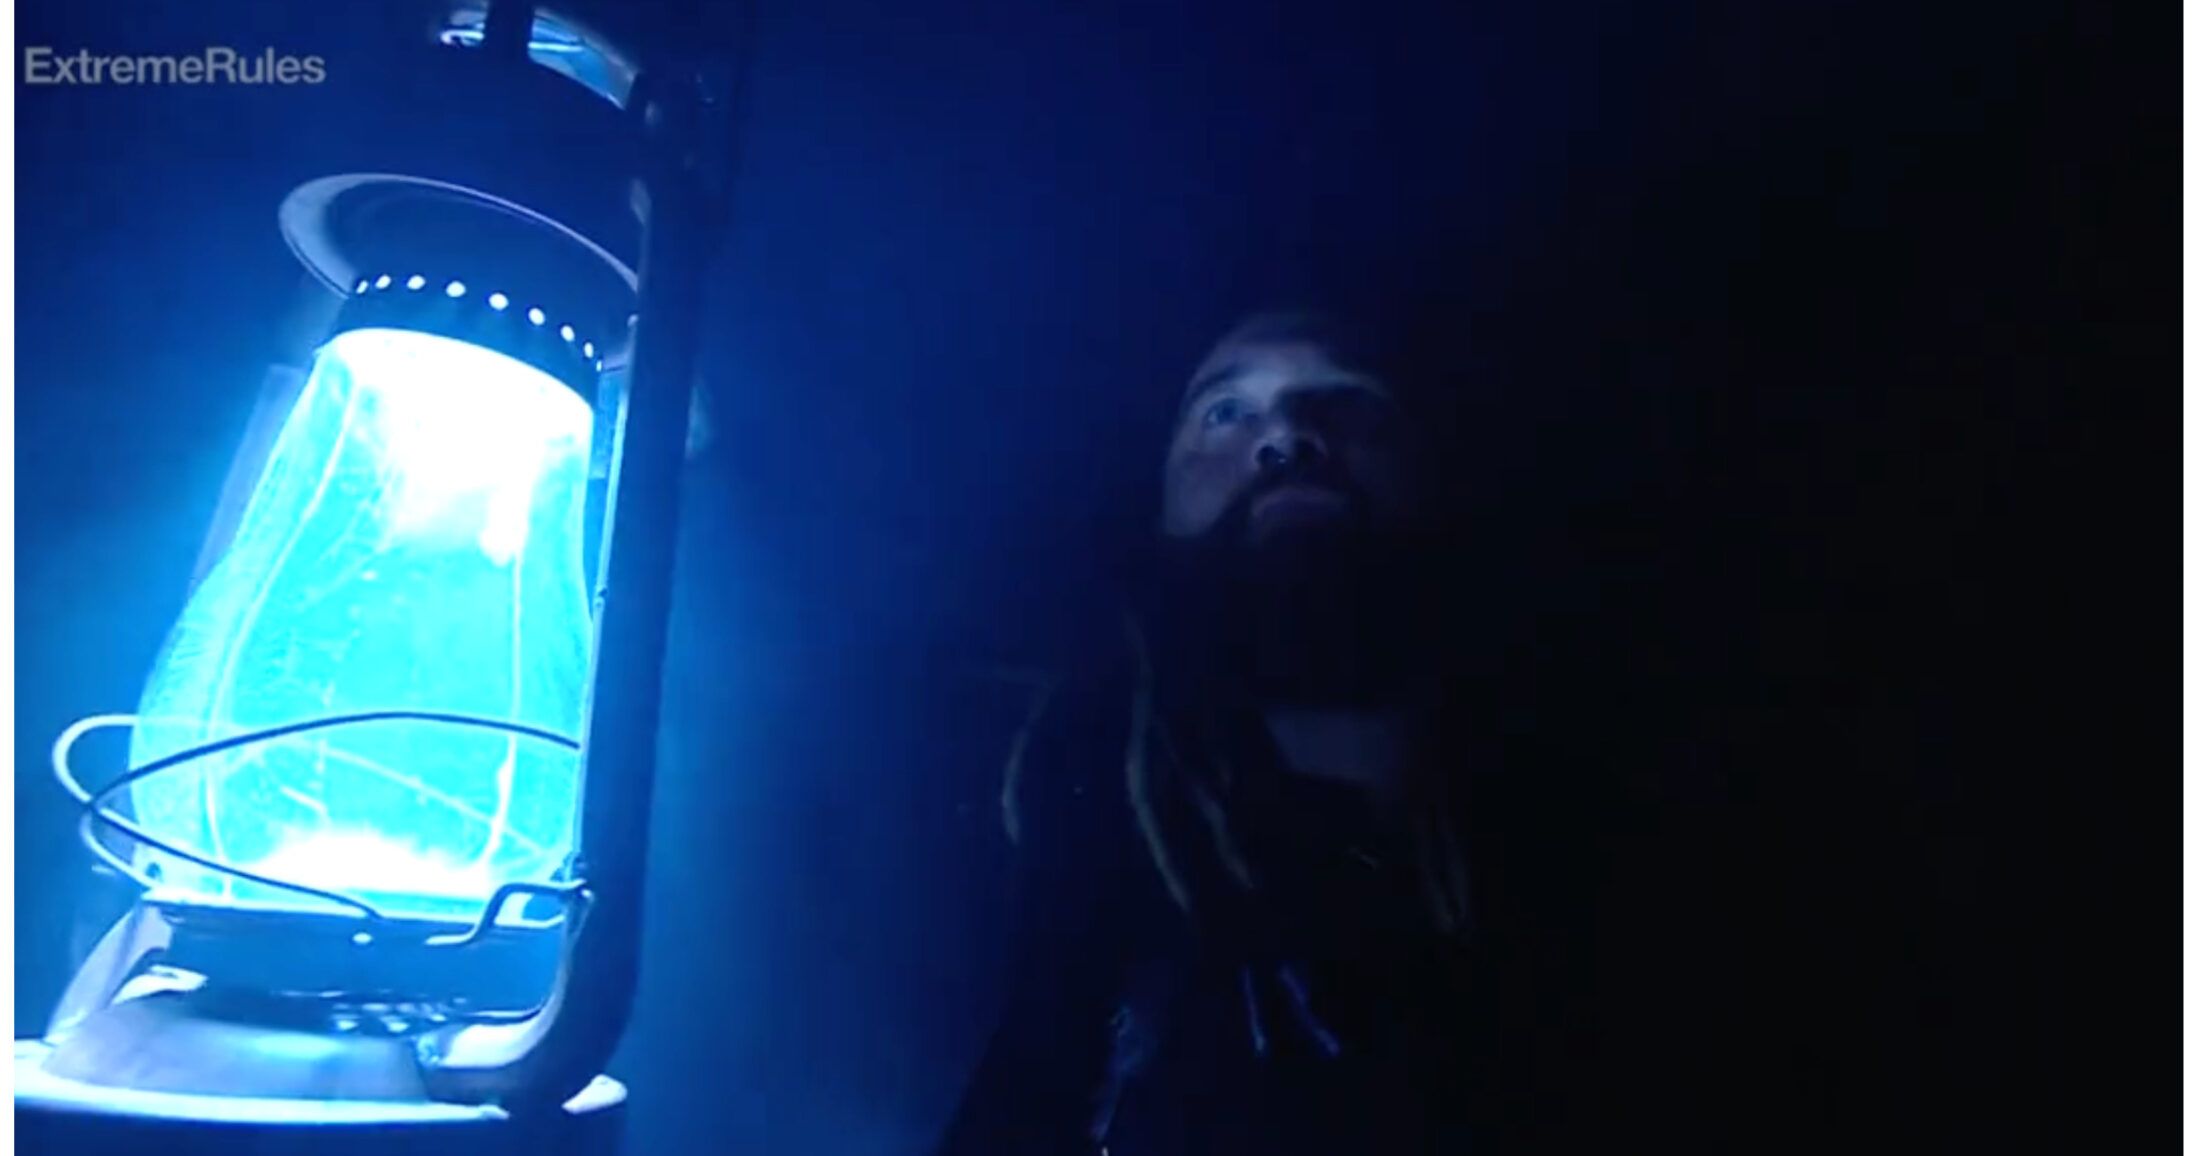 Bray Wyatt returned to WWE at Extreme Rules